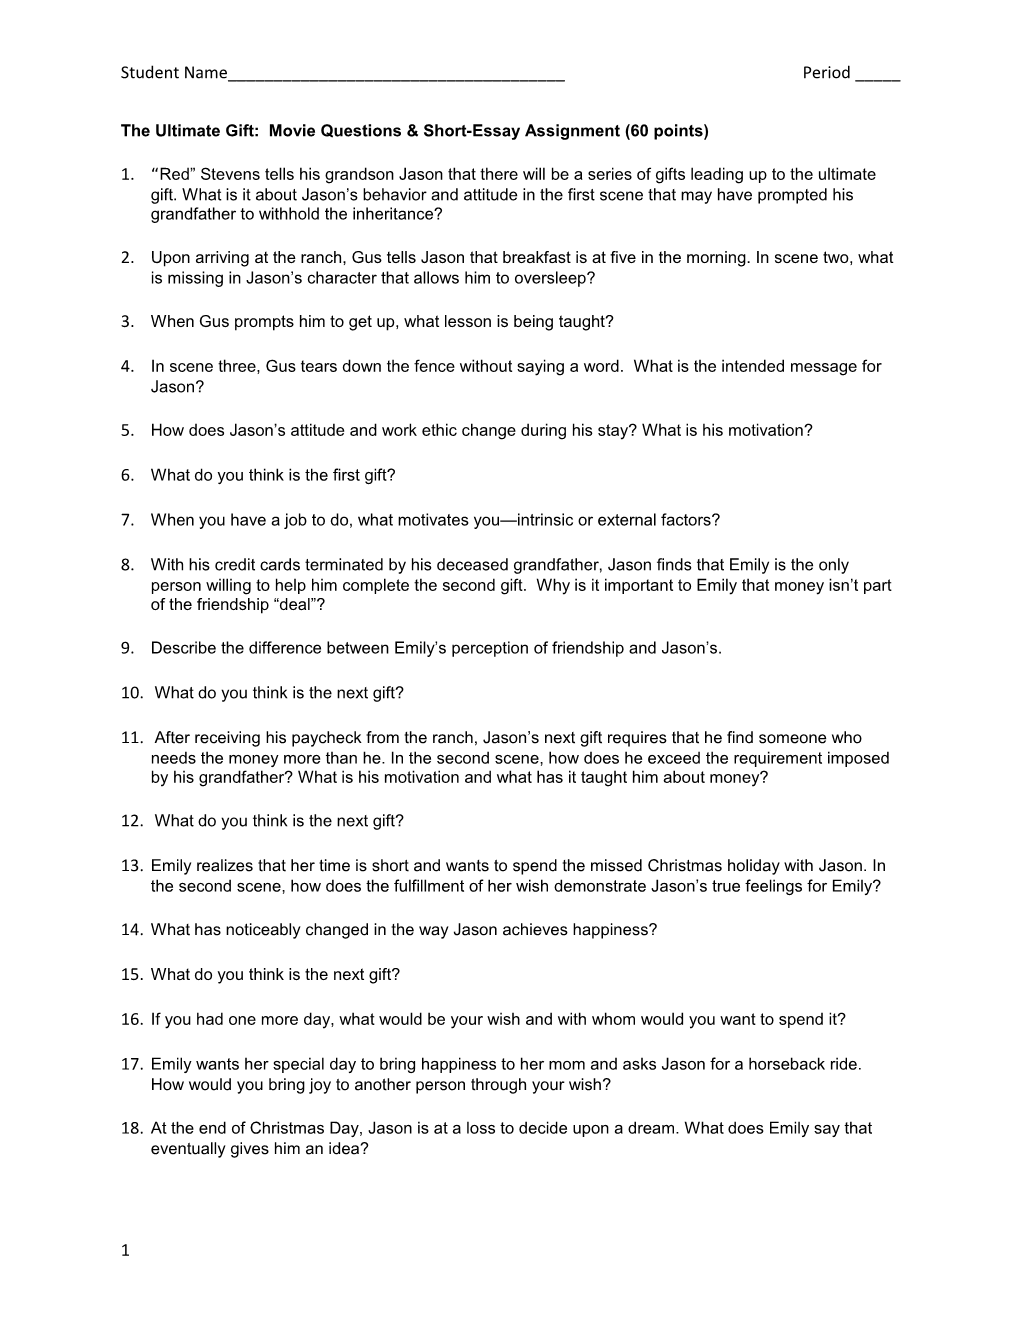 The Ultimate Gift: Movie Questions & Short-Essay Assignment (60 Points)